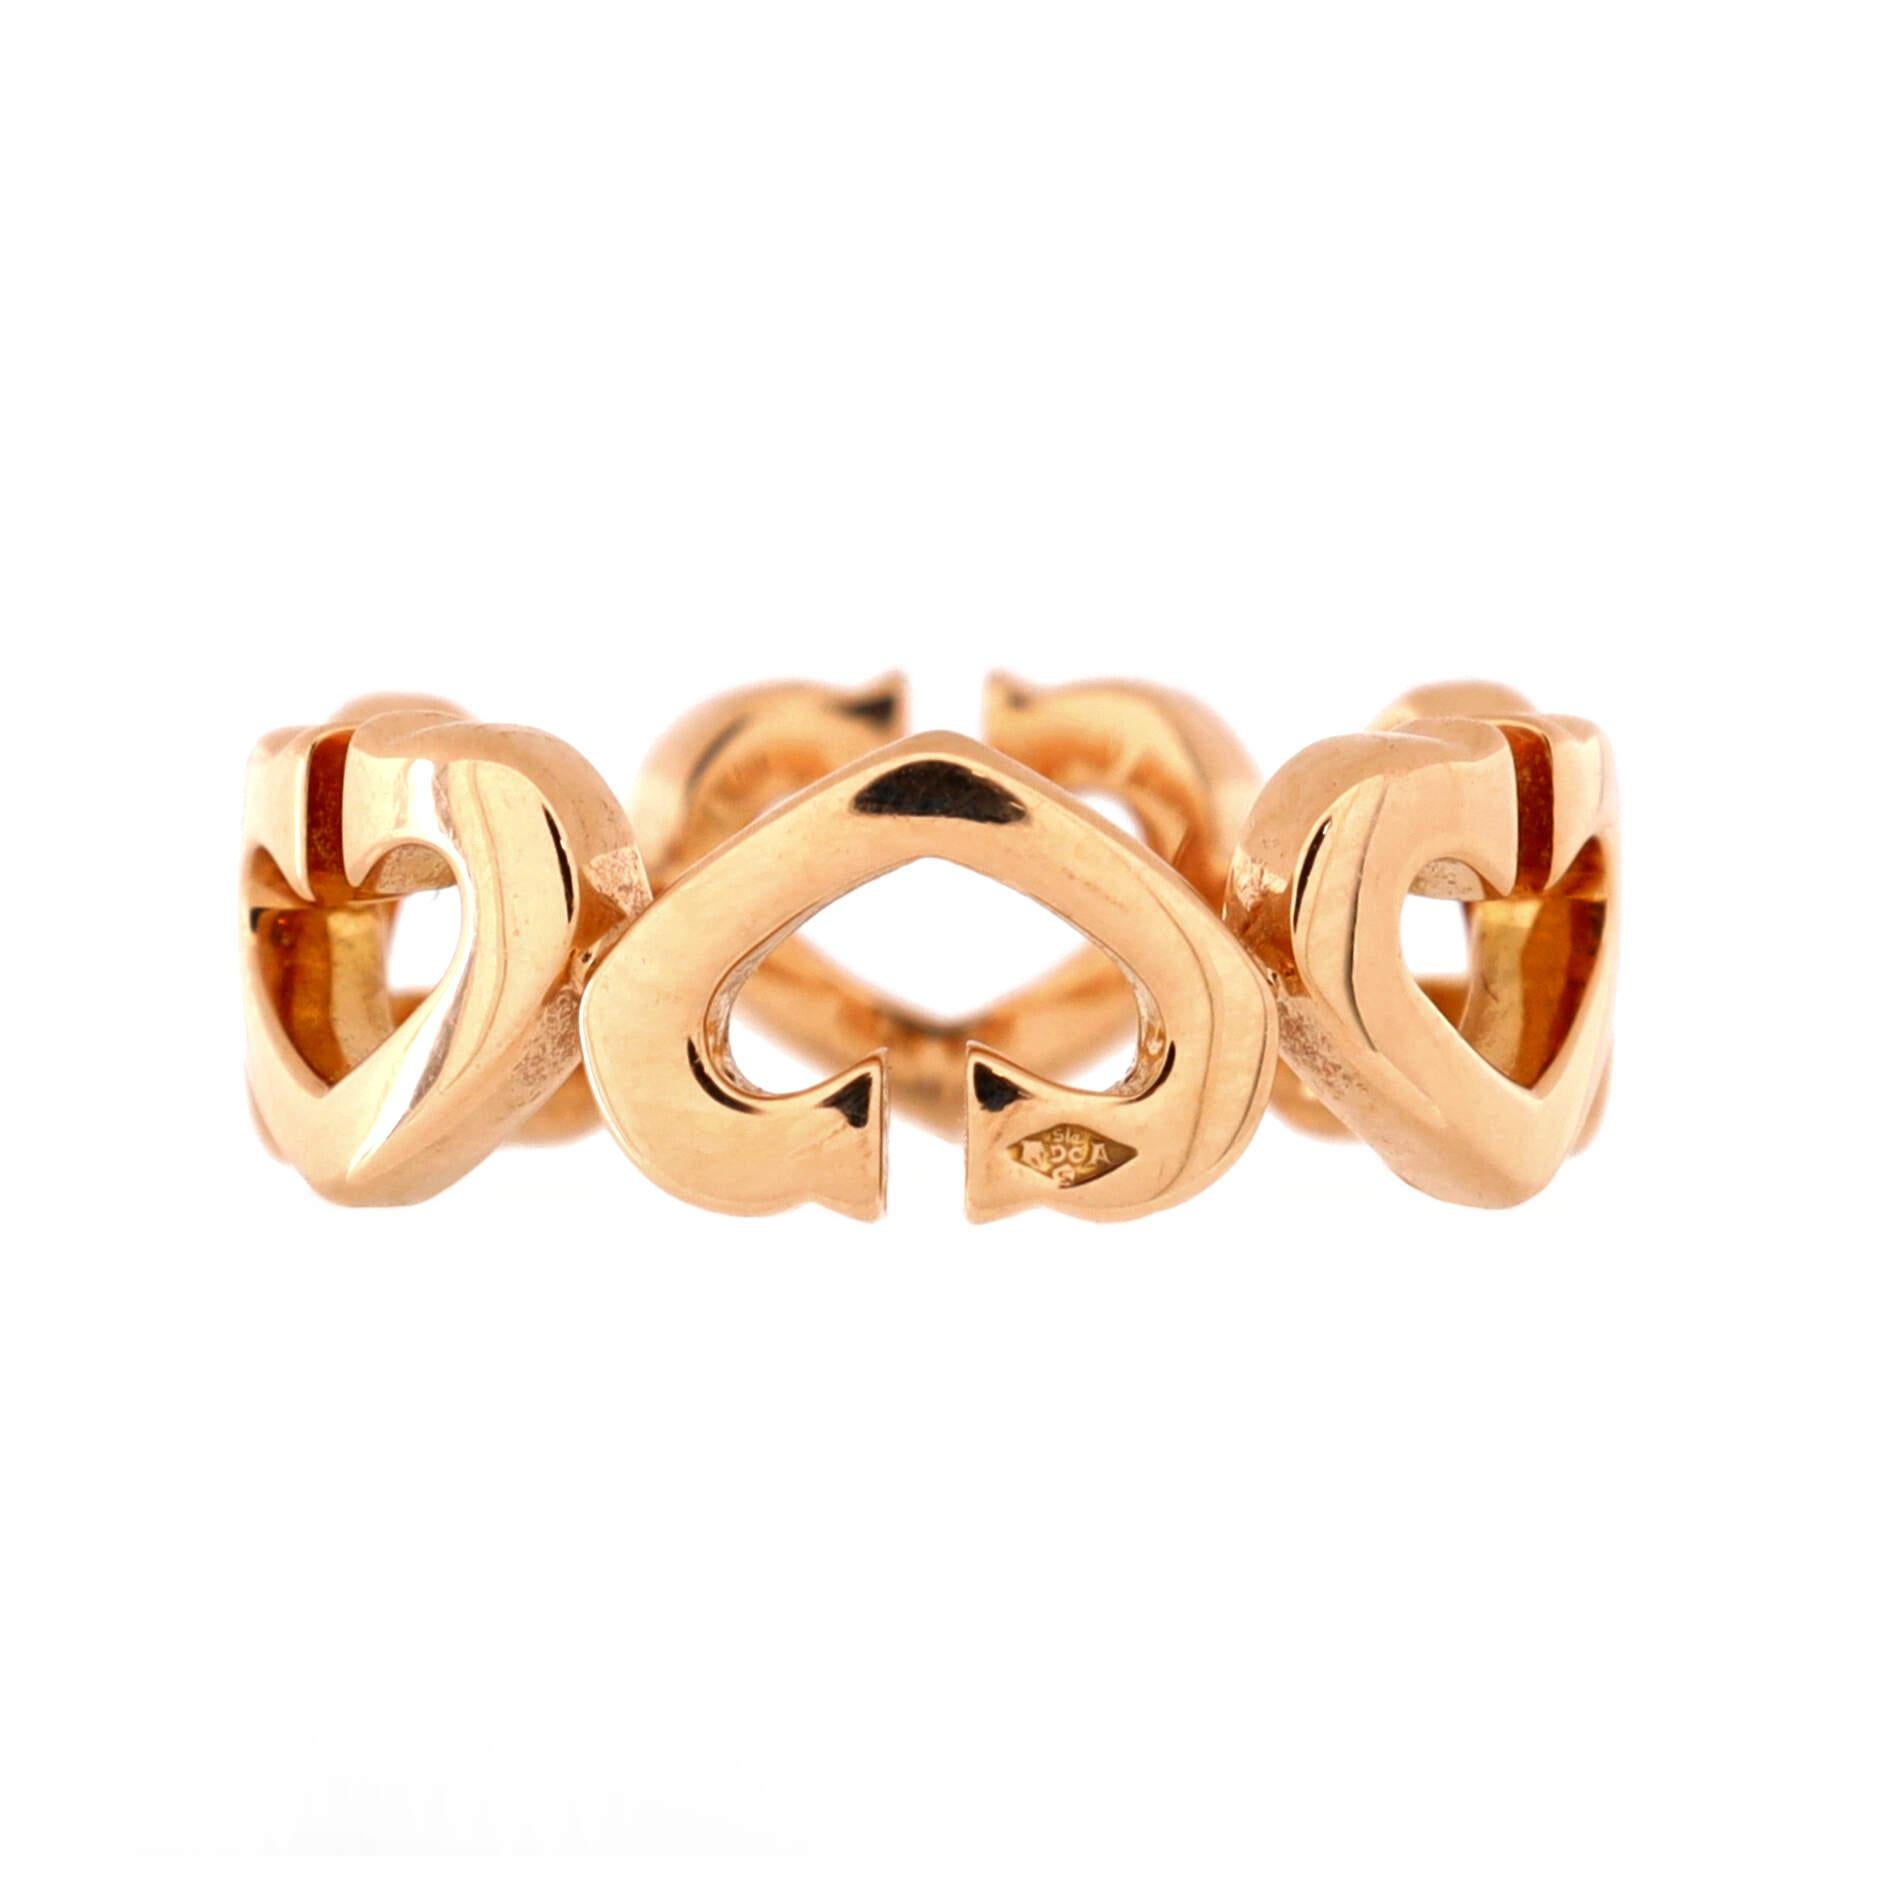 Condition: Great. Minor wear throughout.
Accessories: No Accessories
Measurements: Size: 5.25 - 50, Width: 7.20 mm
Designer: Cartier
Model: C Heart de Cartier Ring 18K Rose Gold and Diamonds
Exterior Color: Rose Gold
Item Number: 203579/2